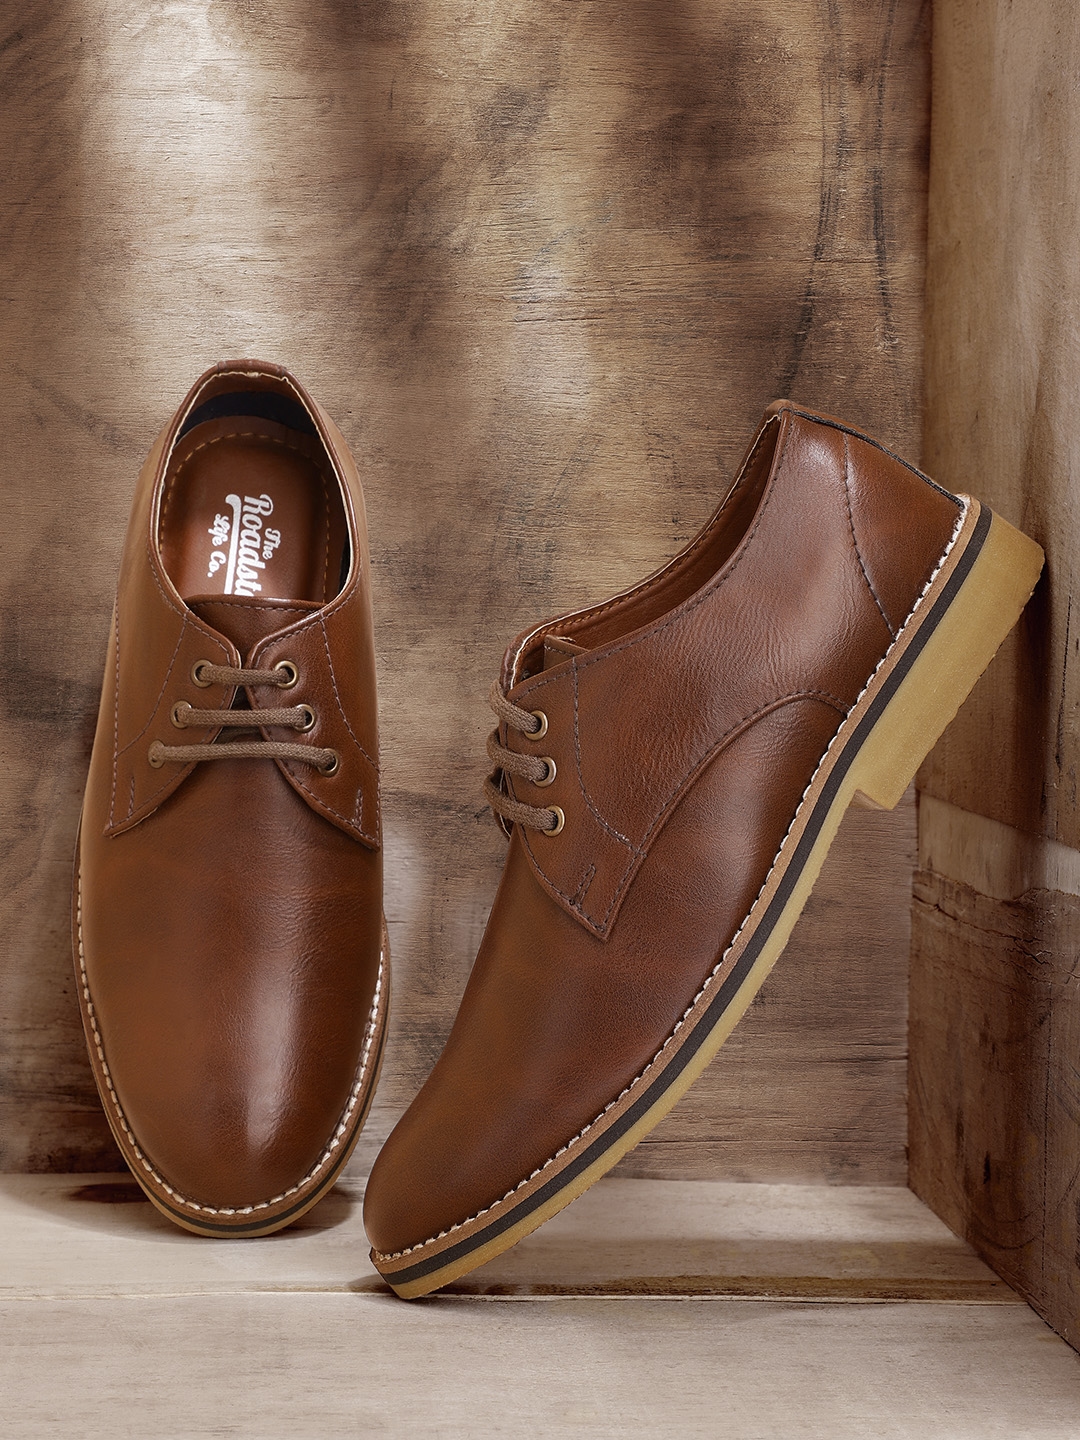 How to pair the derby shoes with jeans and look classy-Bruno Marc